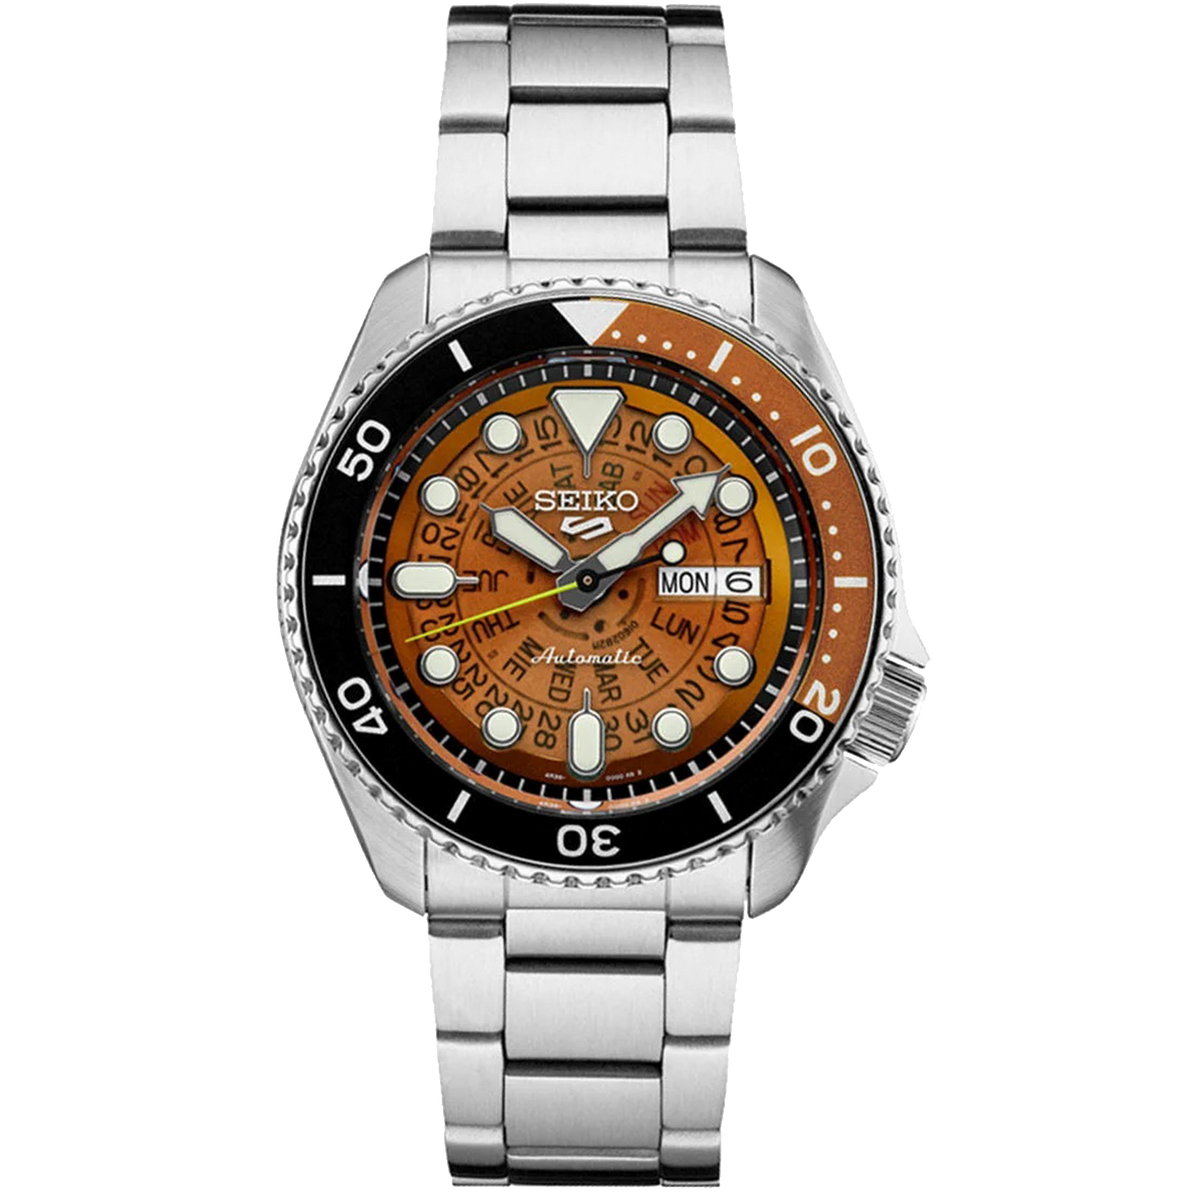 Seiko 5 Sport - Sport Series with Brown Translucent Dial